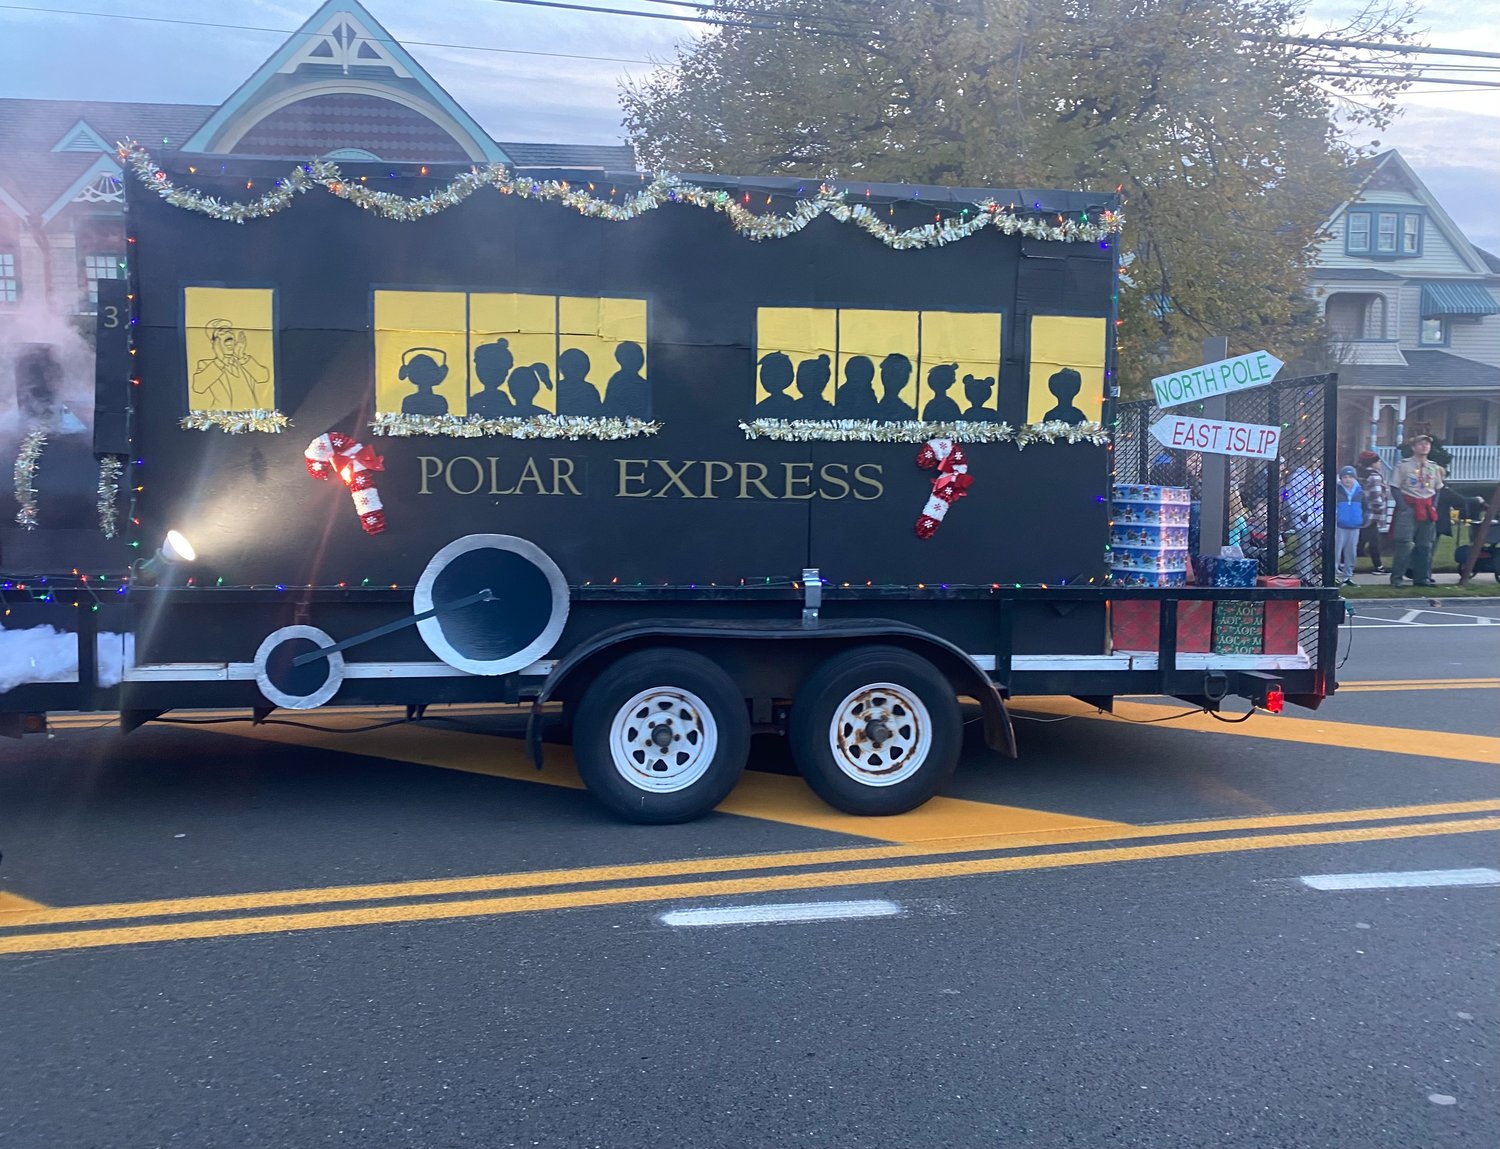 Exchange Ambulance even brought the Polar Express to the parade!